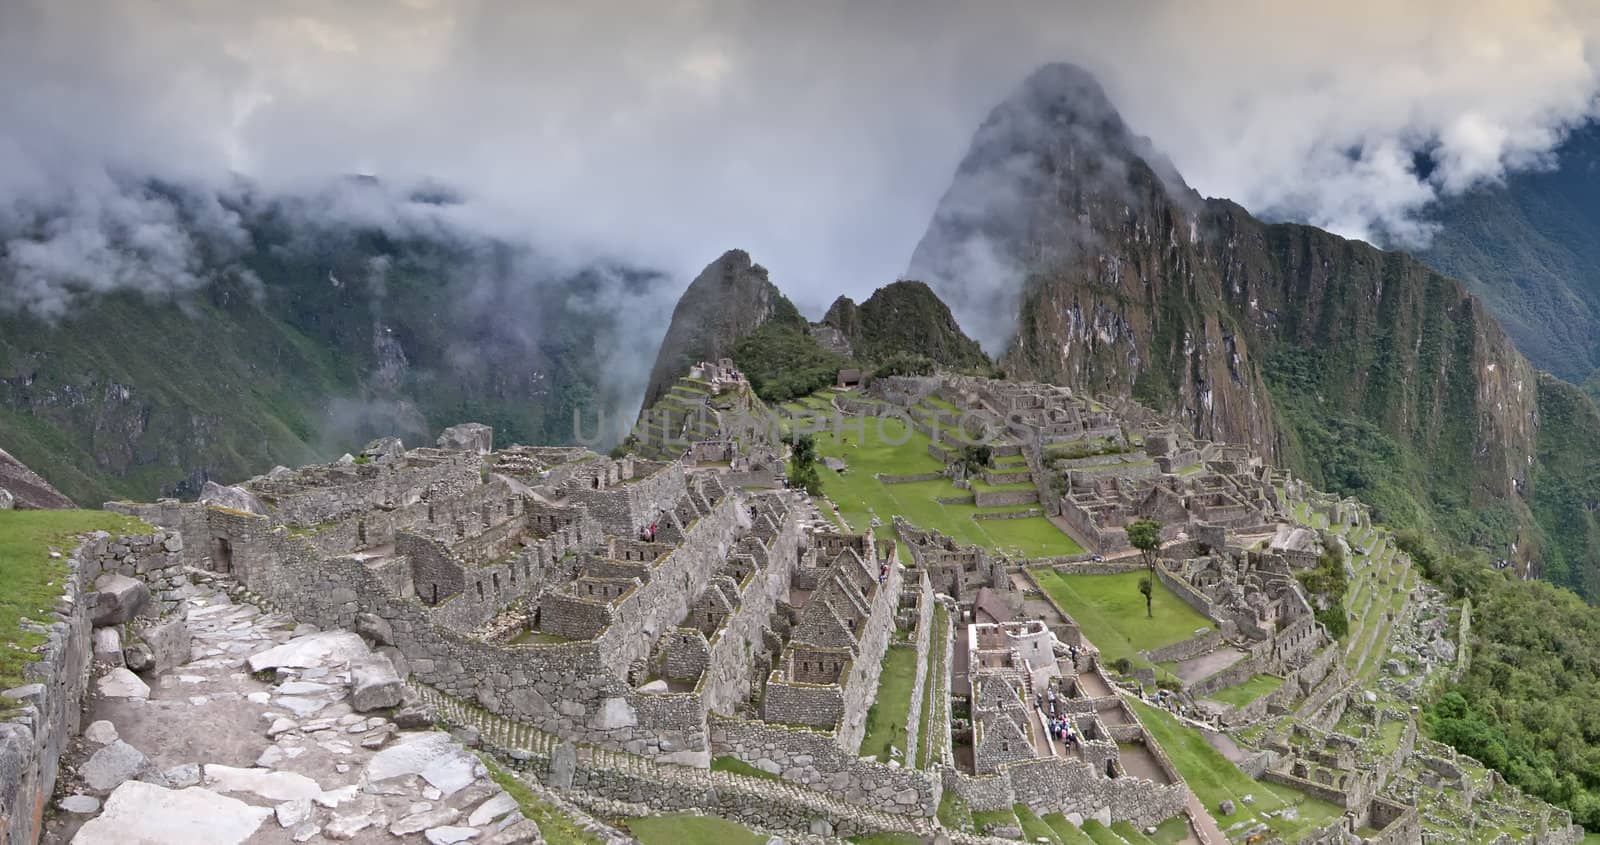 The Lost City of the Incas by urmoments